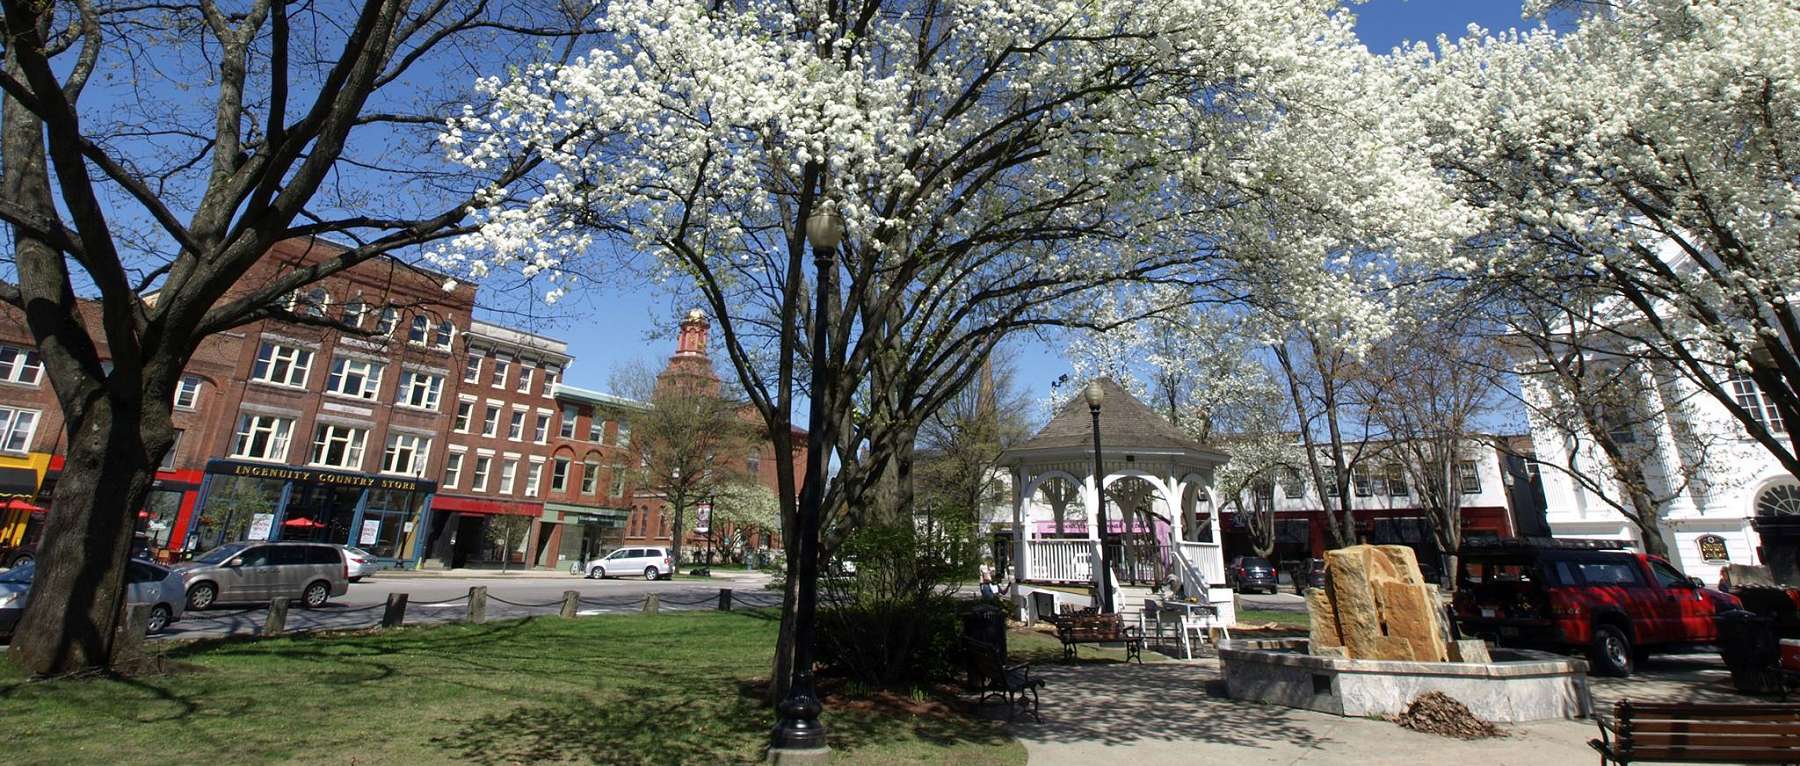 Downtown Keene, New Hampshire Spring View